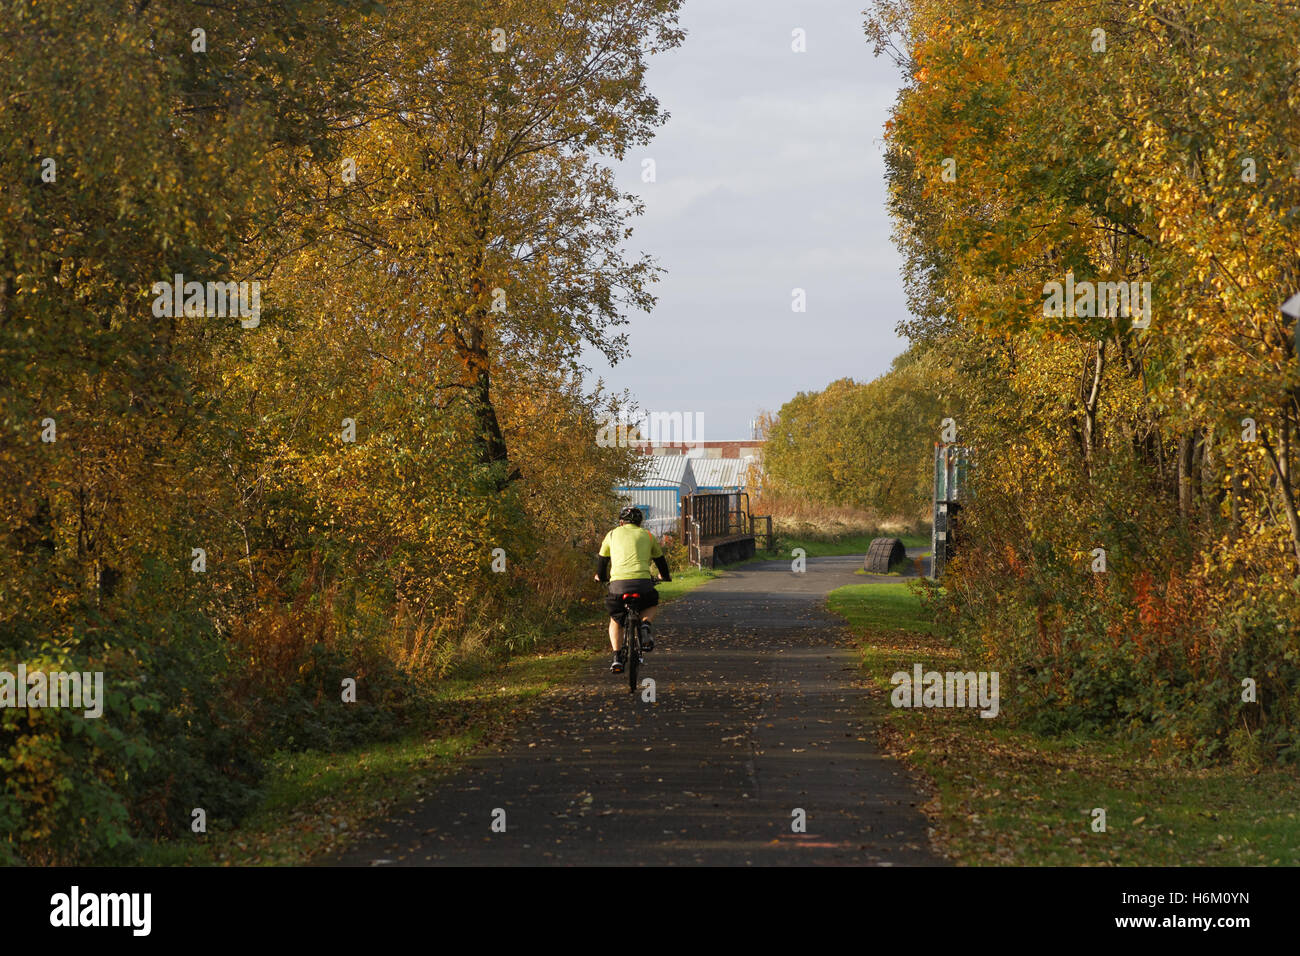 Cyclist on bike Forth and Clyde canal, Glasgow Autumnal trees Stock Photo